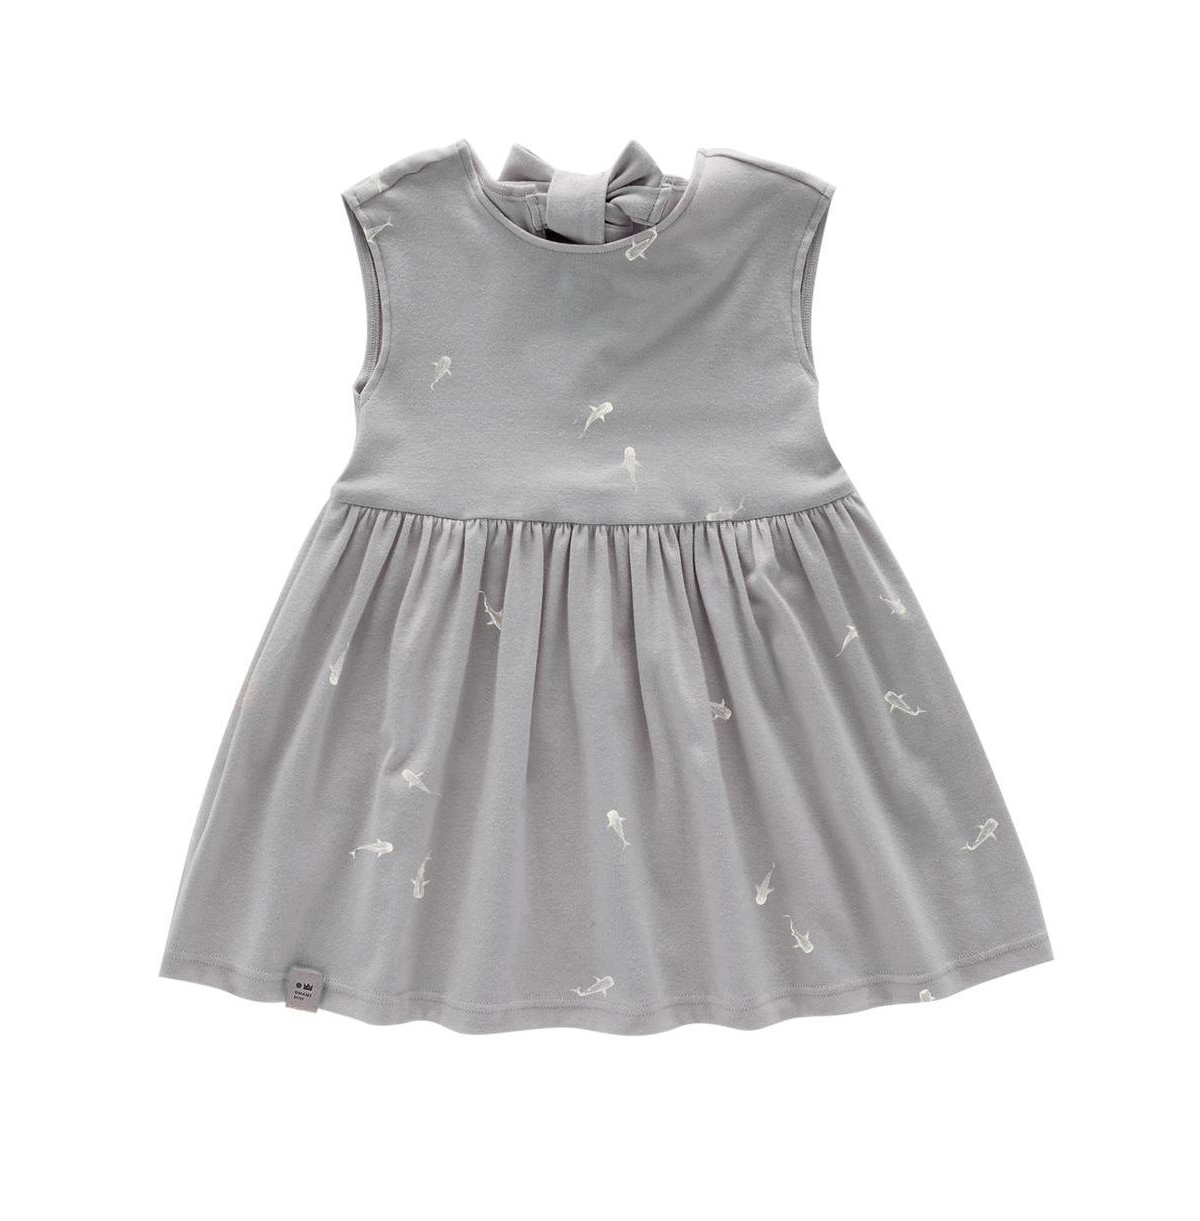 Omamimini Toddler|child Girls, Sleeveless Fit & Flare Jersey Dress In Grey